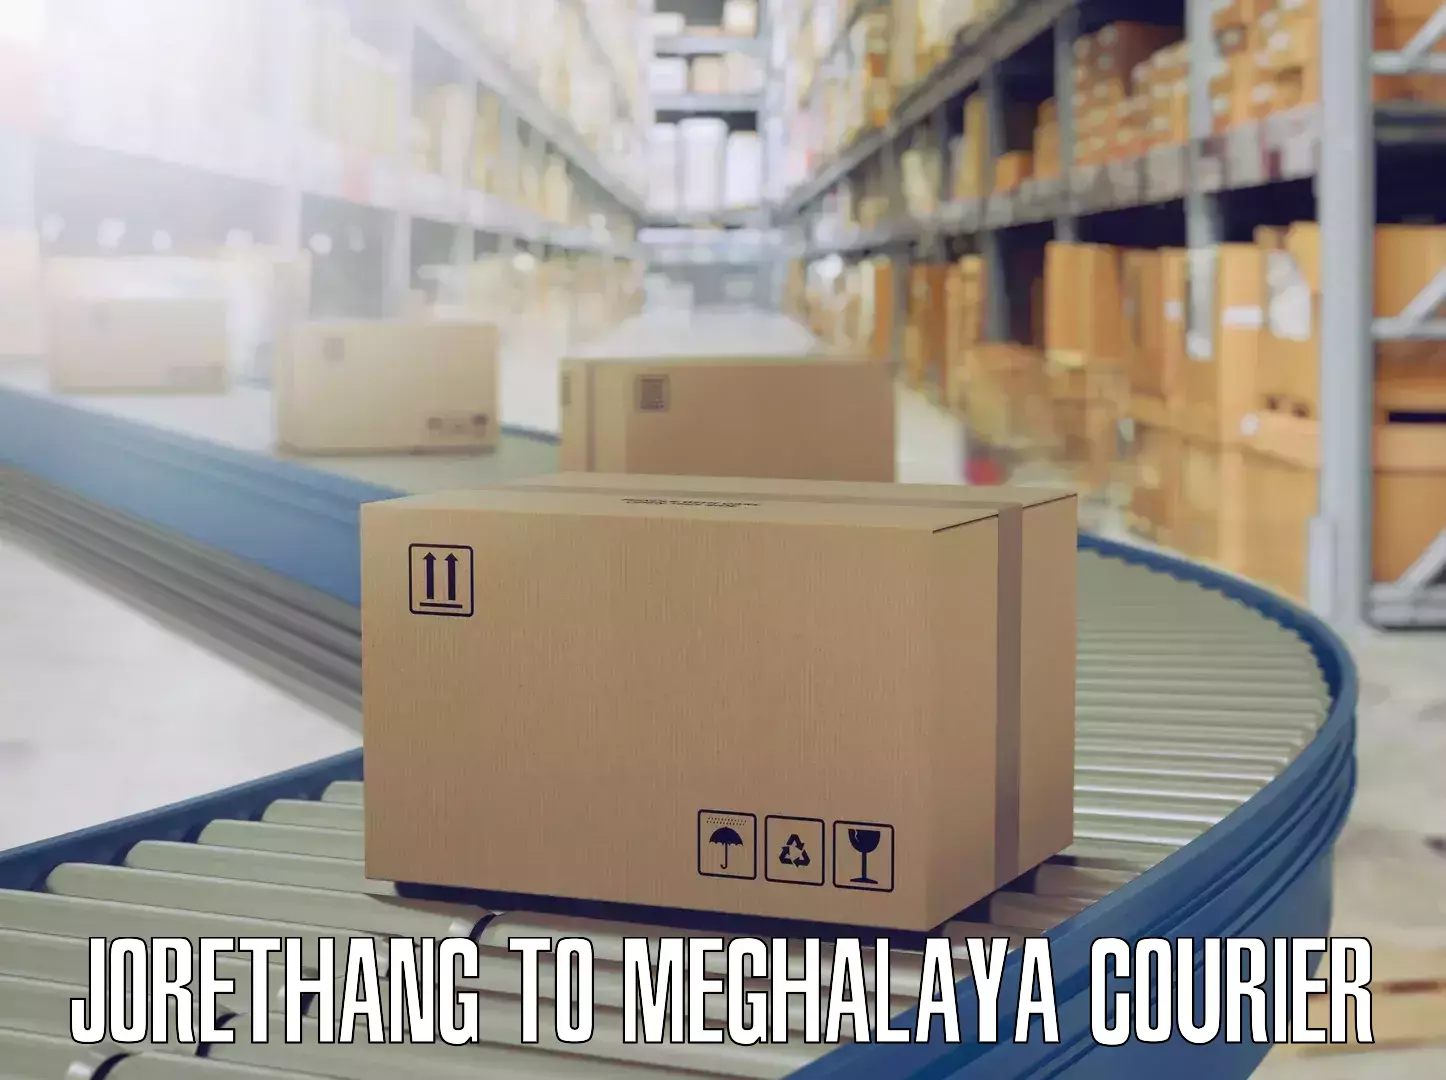 Professional movers and packers Jorethang to Meghalaya